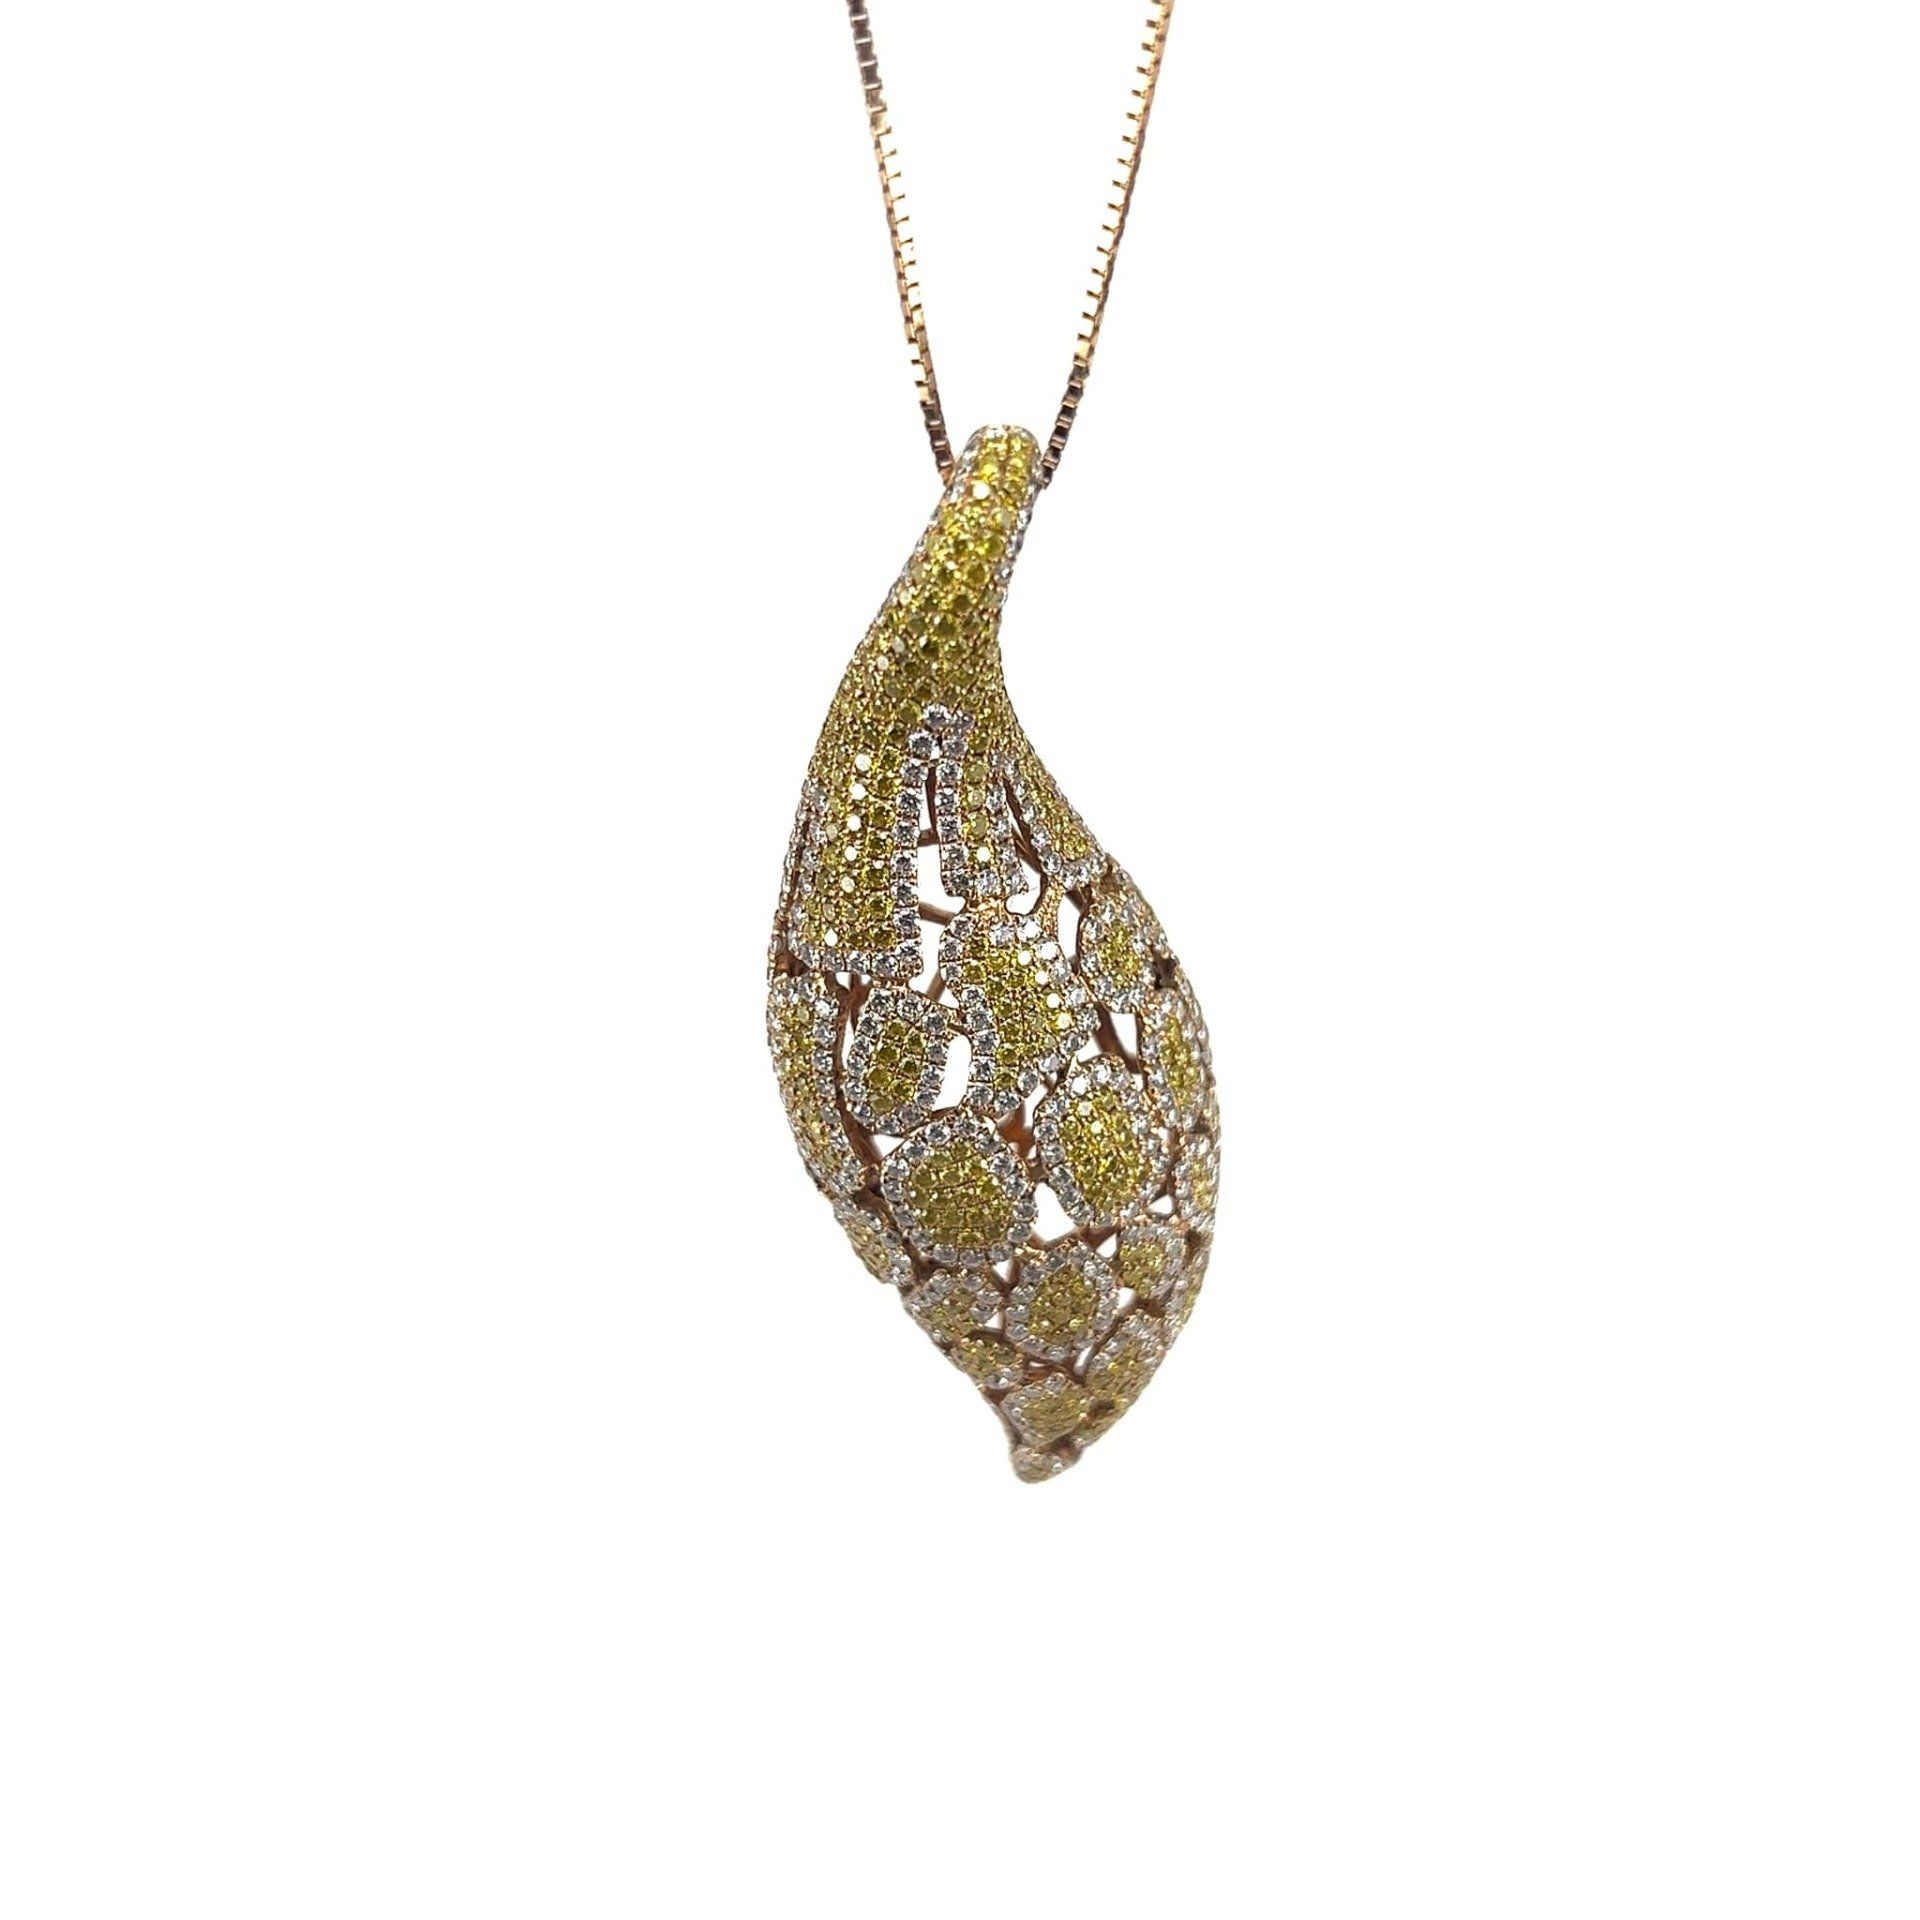 A necklace with a pendant in the shape of a leaf